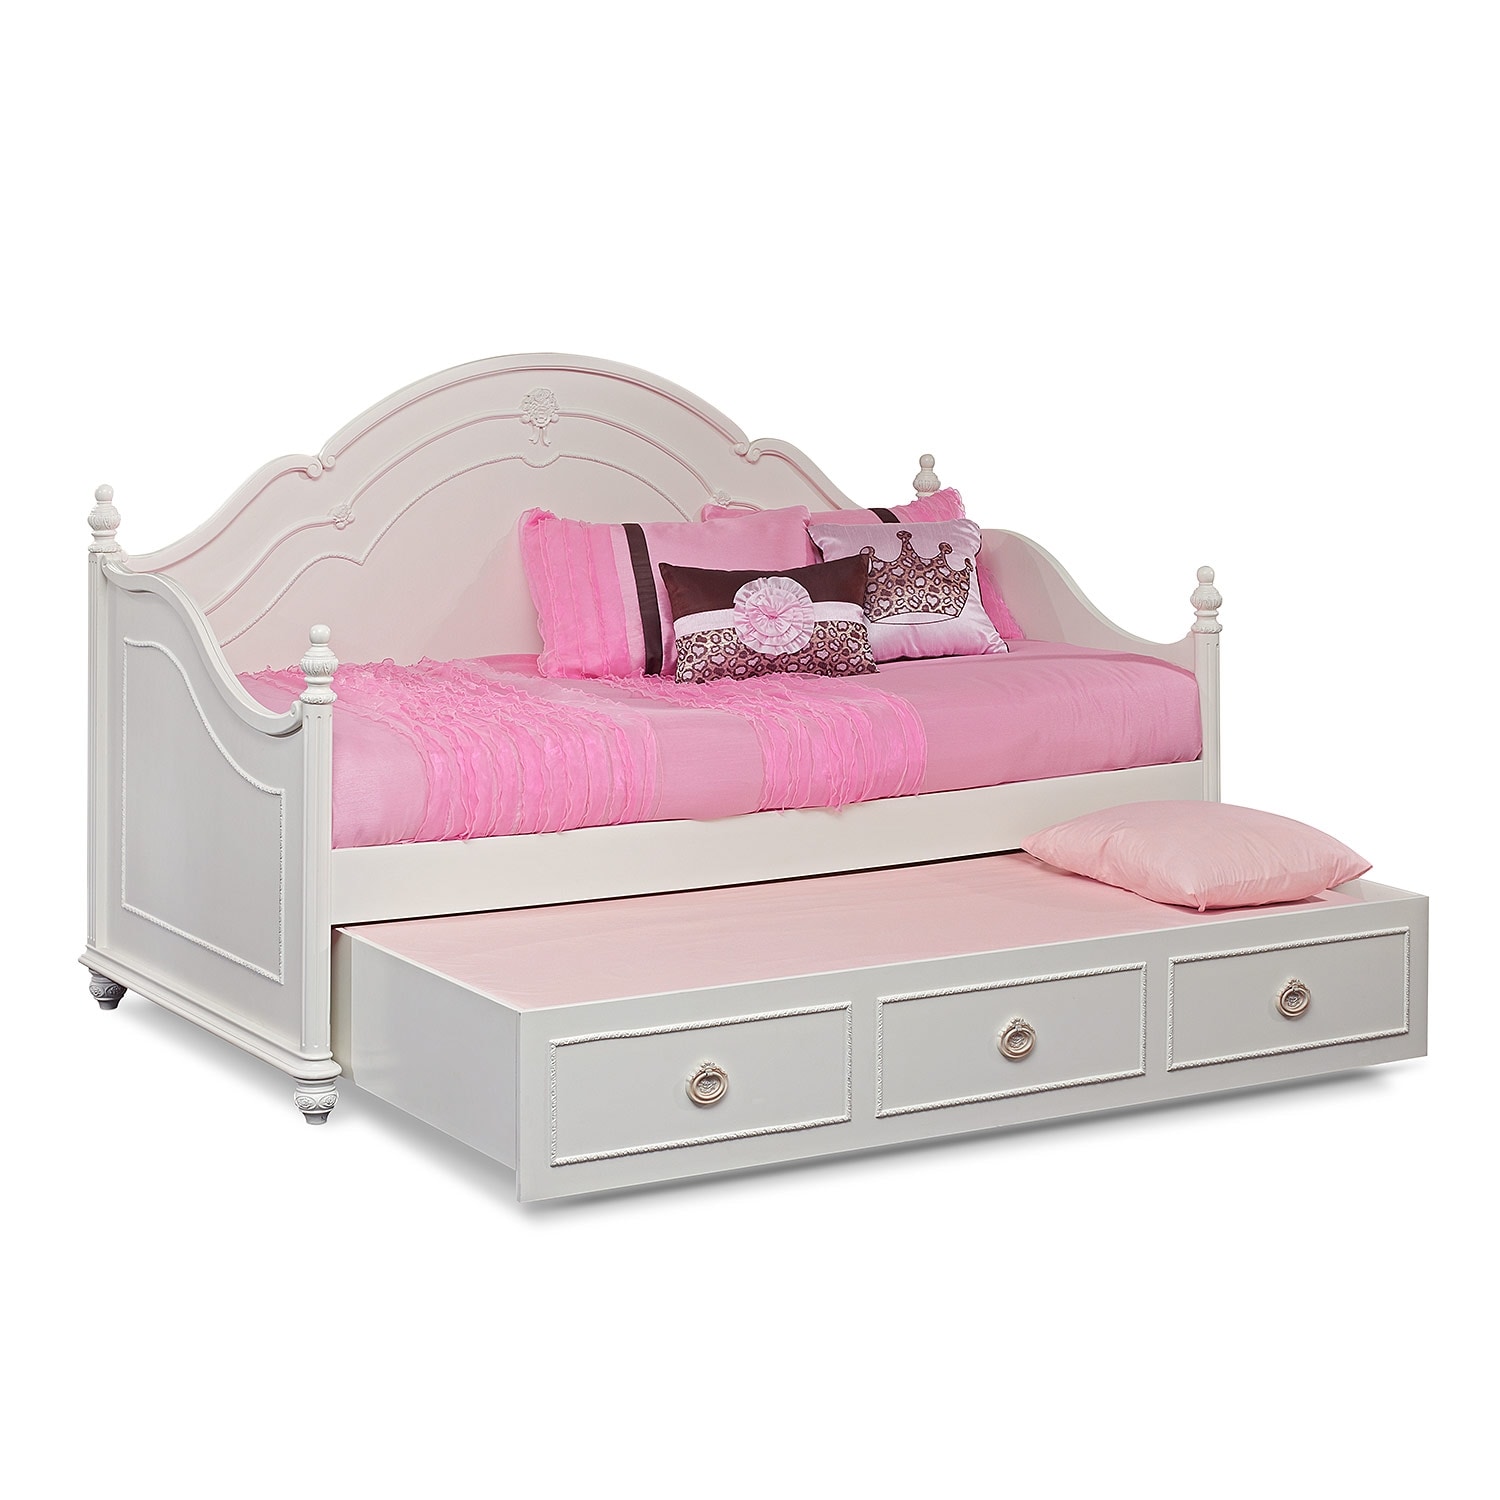 Trundle Day Beds : Beds - m